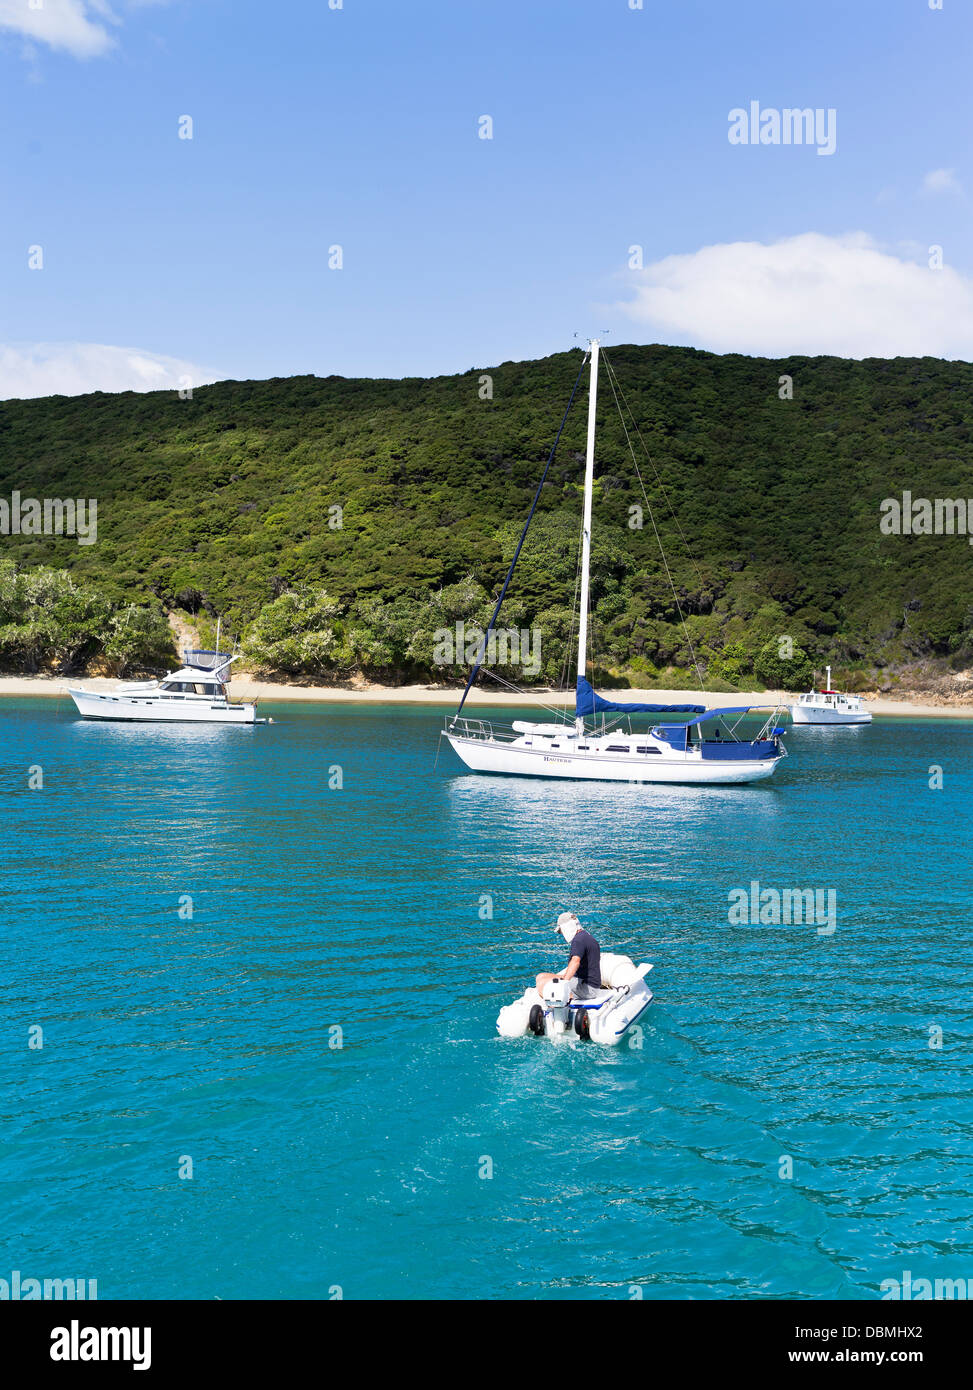 dh Urupukapuka Island anchorage BAY OF ISLANDS NEW ZEALAND Man in motor dinghy sailing and cruiser yachts anchored off shore yacht leisure Stock Photo